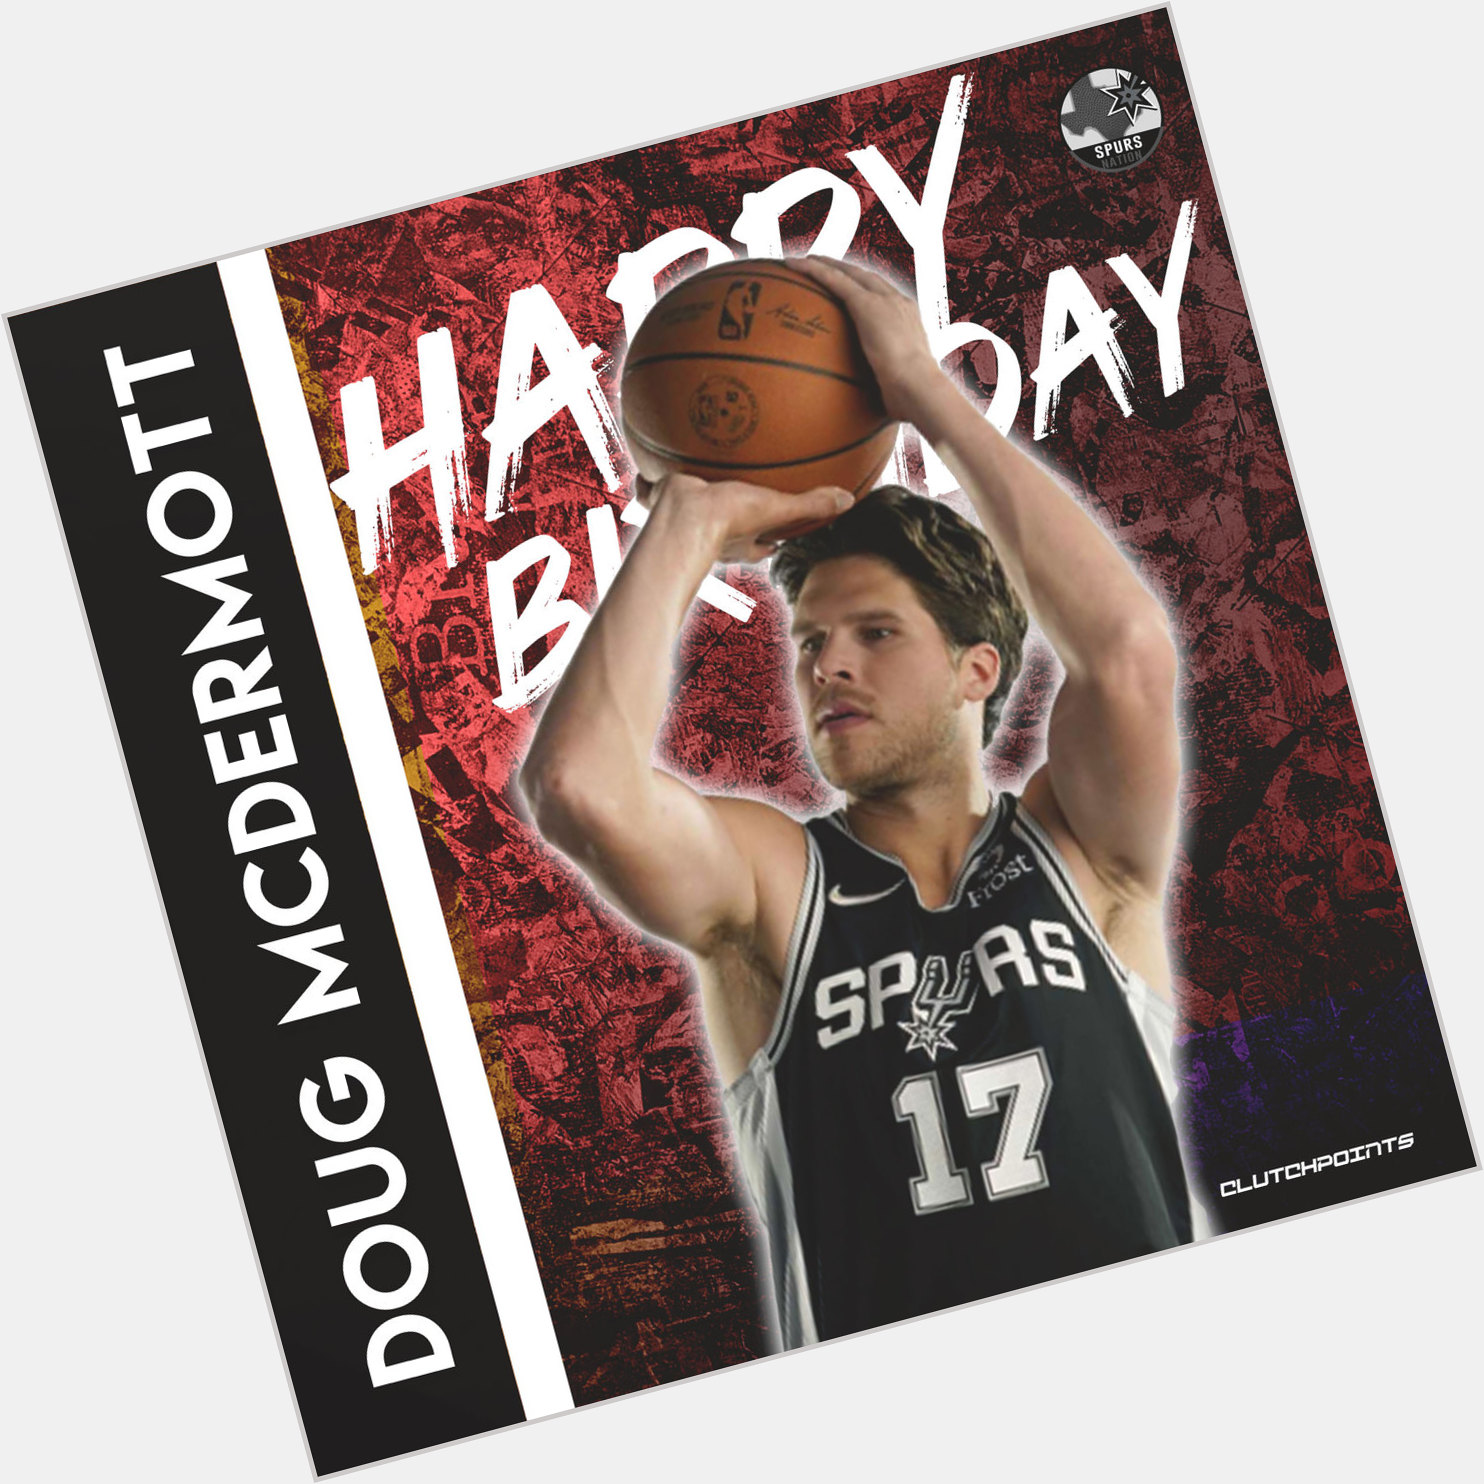 Join Spurs nation as we greet Doug McDermott a happy 30th birthday! 